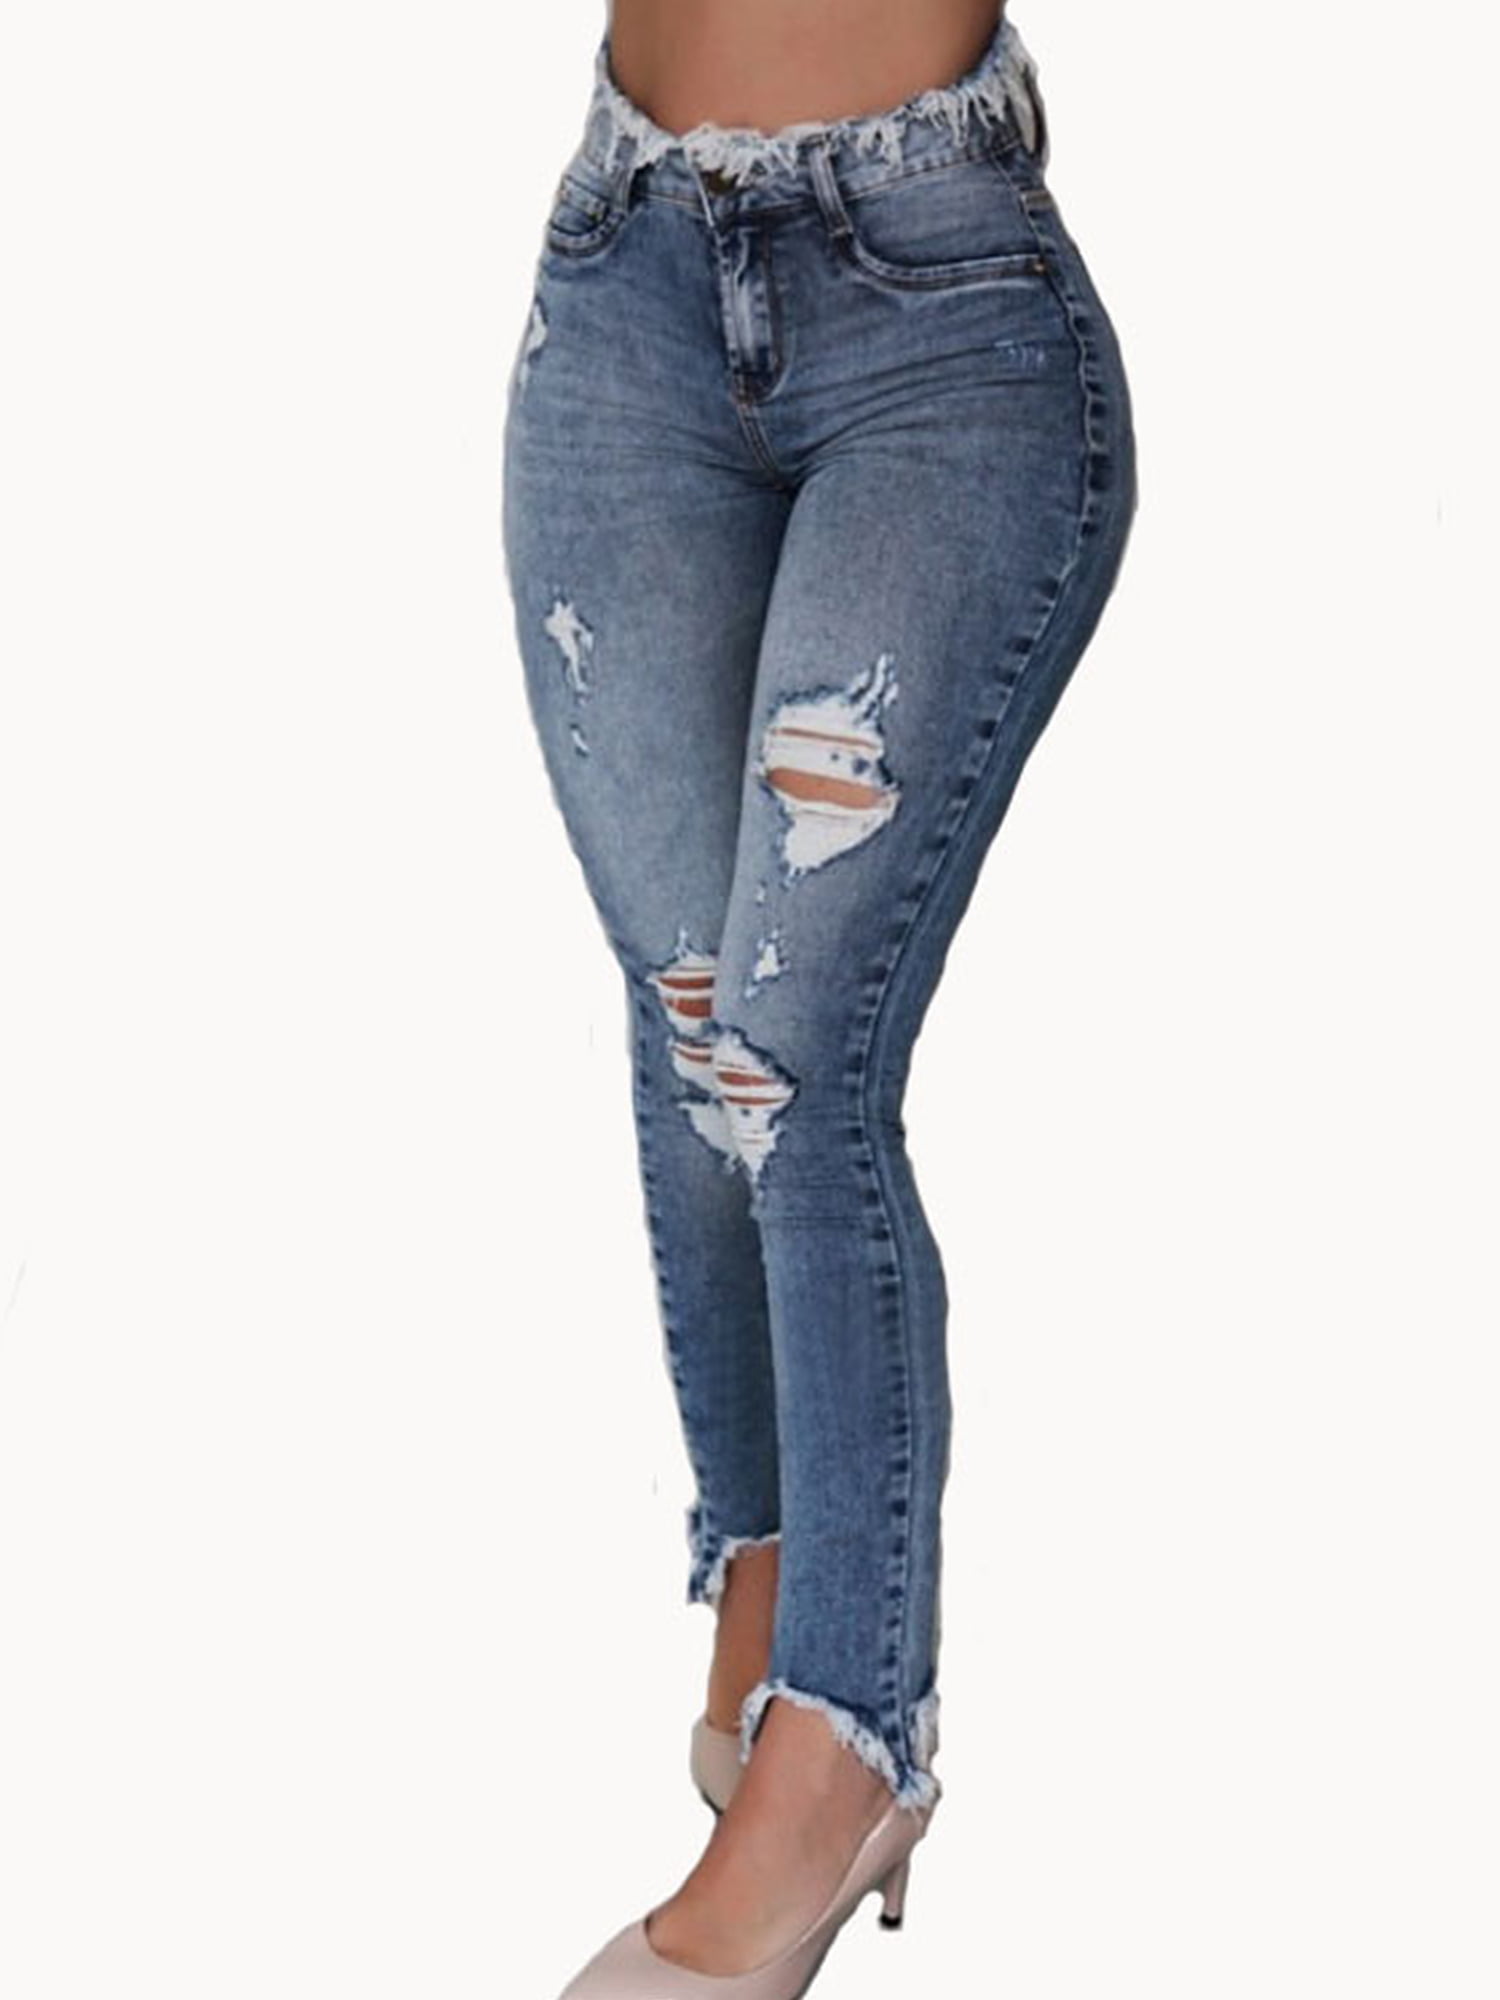 Women's High Waist Washed Frayed Ripped Holes Skinny Jeans Casual Stretch Slim Denim Trousers xoxing Jeans for Women B